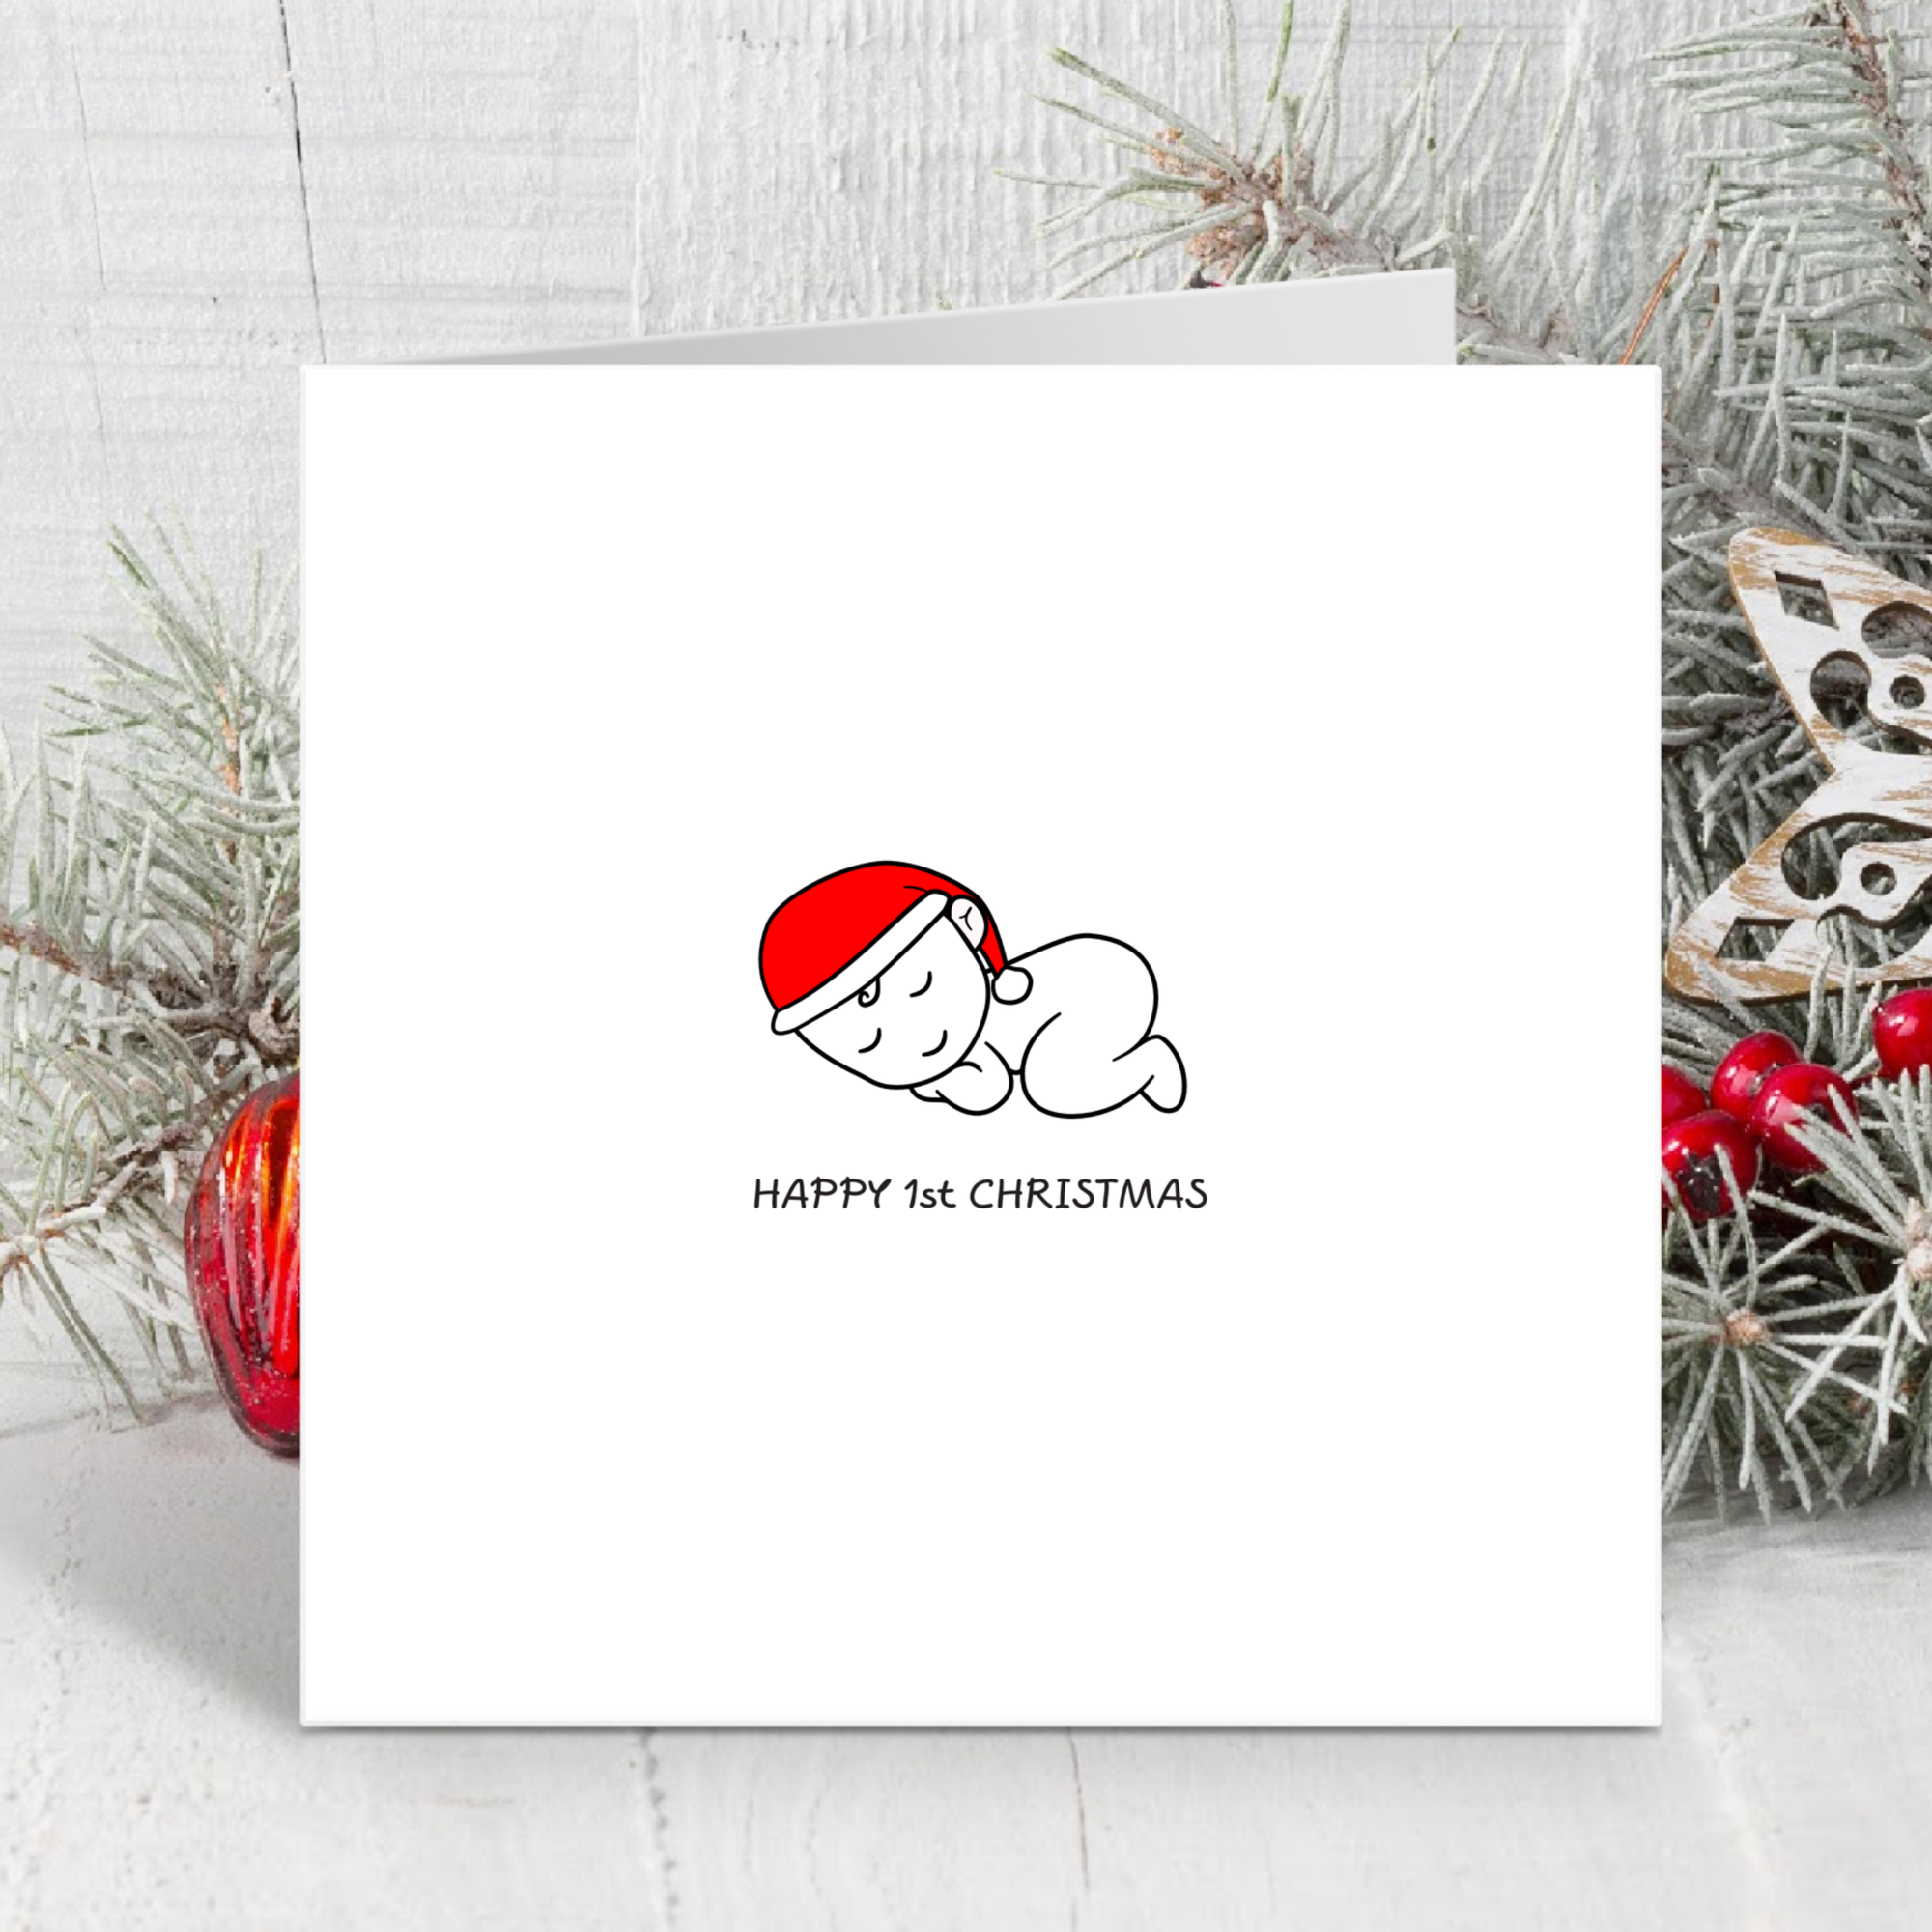 1st Birthday Christmas Card for Baby - Cute Sleeping Baby Wearing a Red Santa Claus Hat - Happy First Xmas